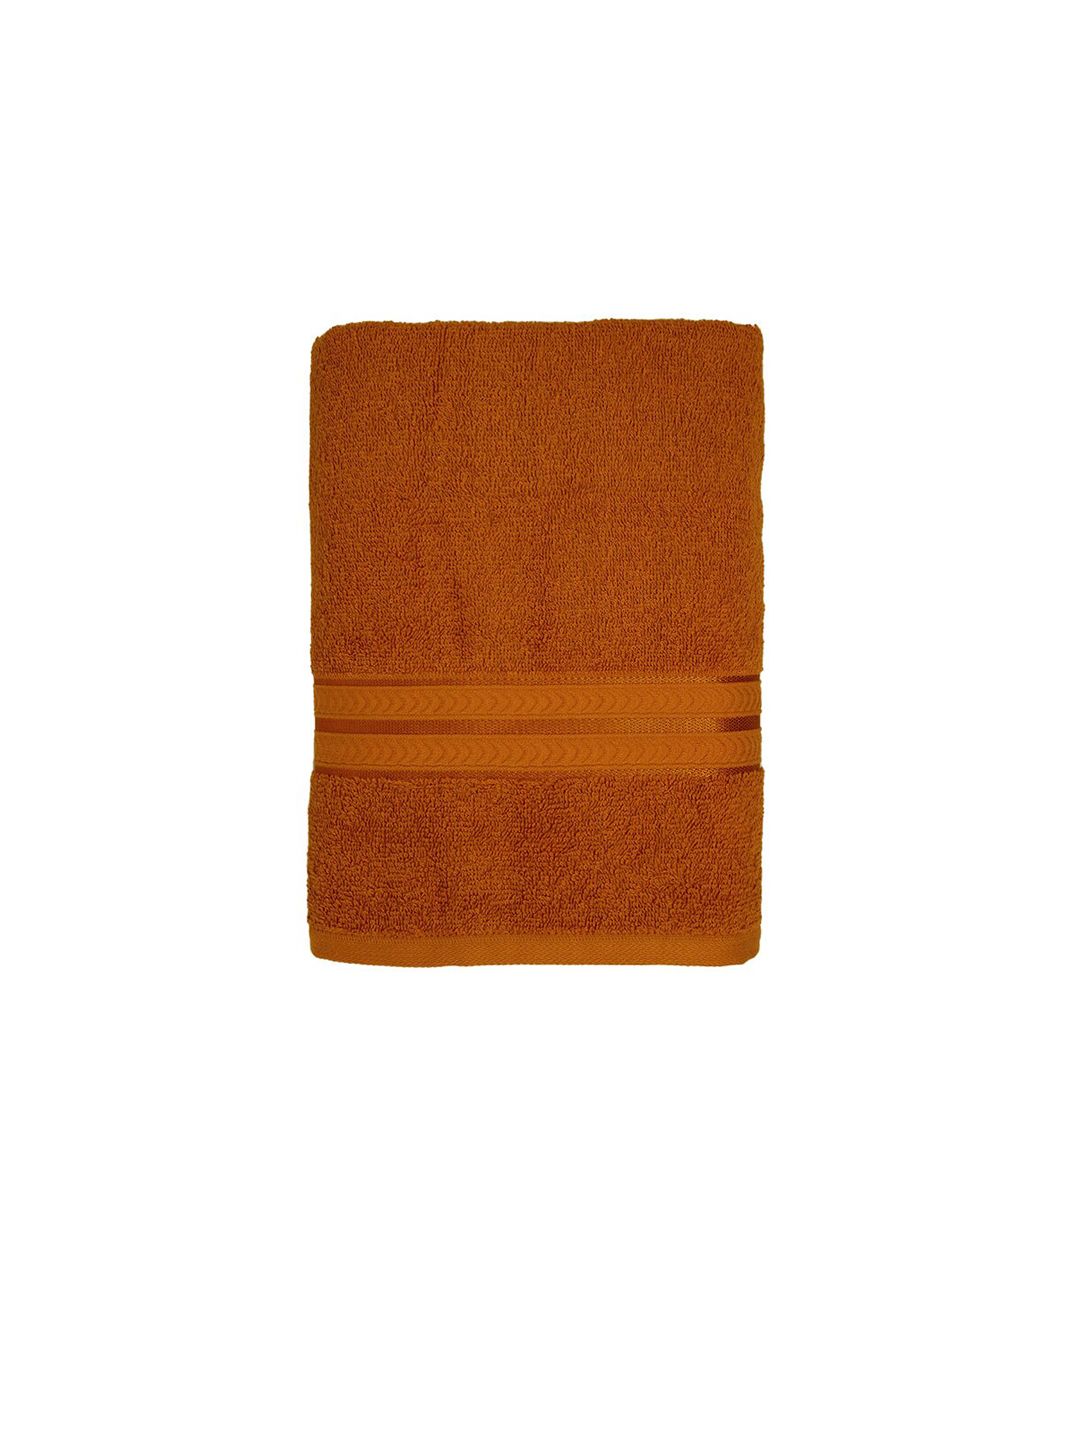 Trident Brown Solid Cotton 400 GSM Towel Set Price in India